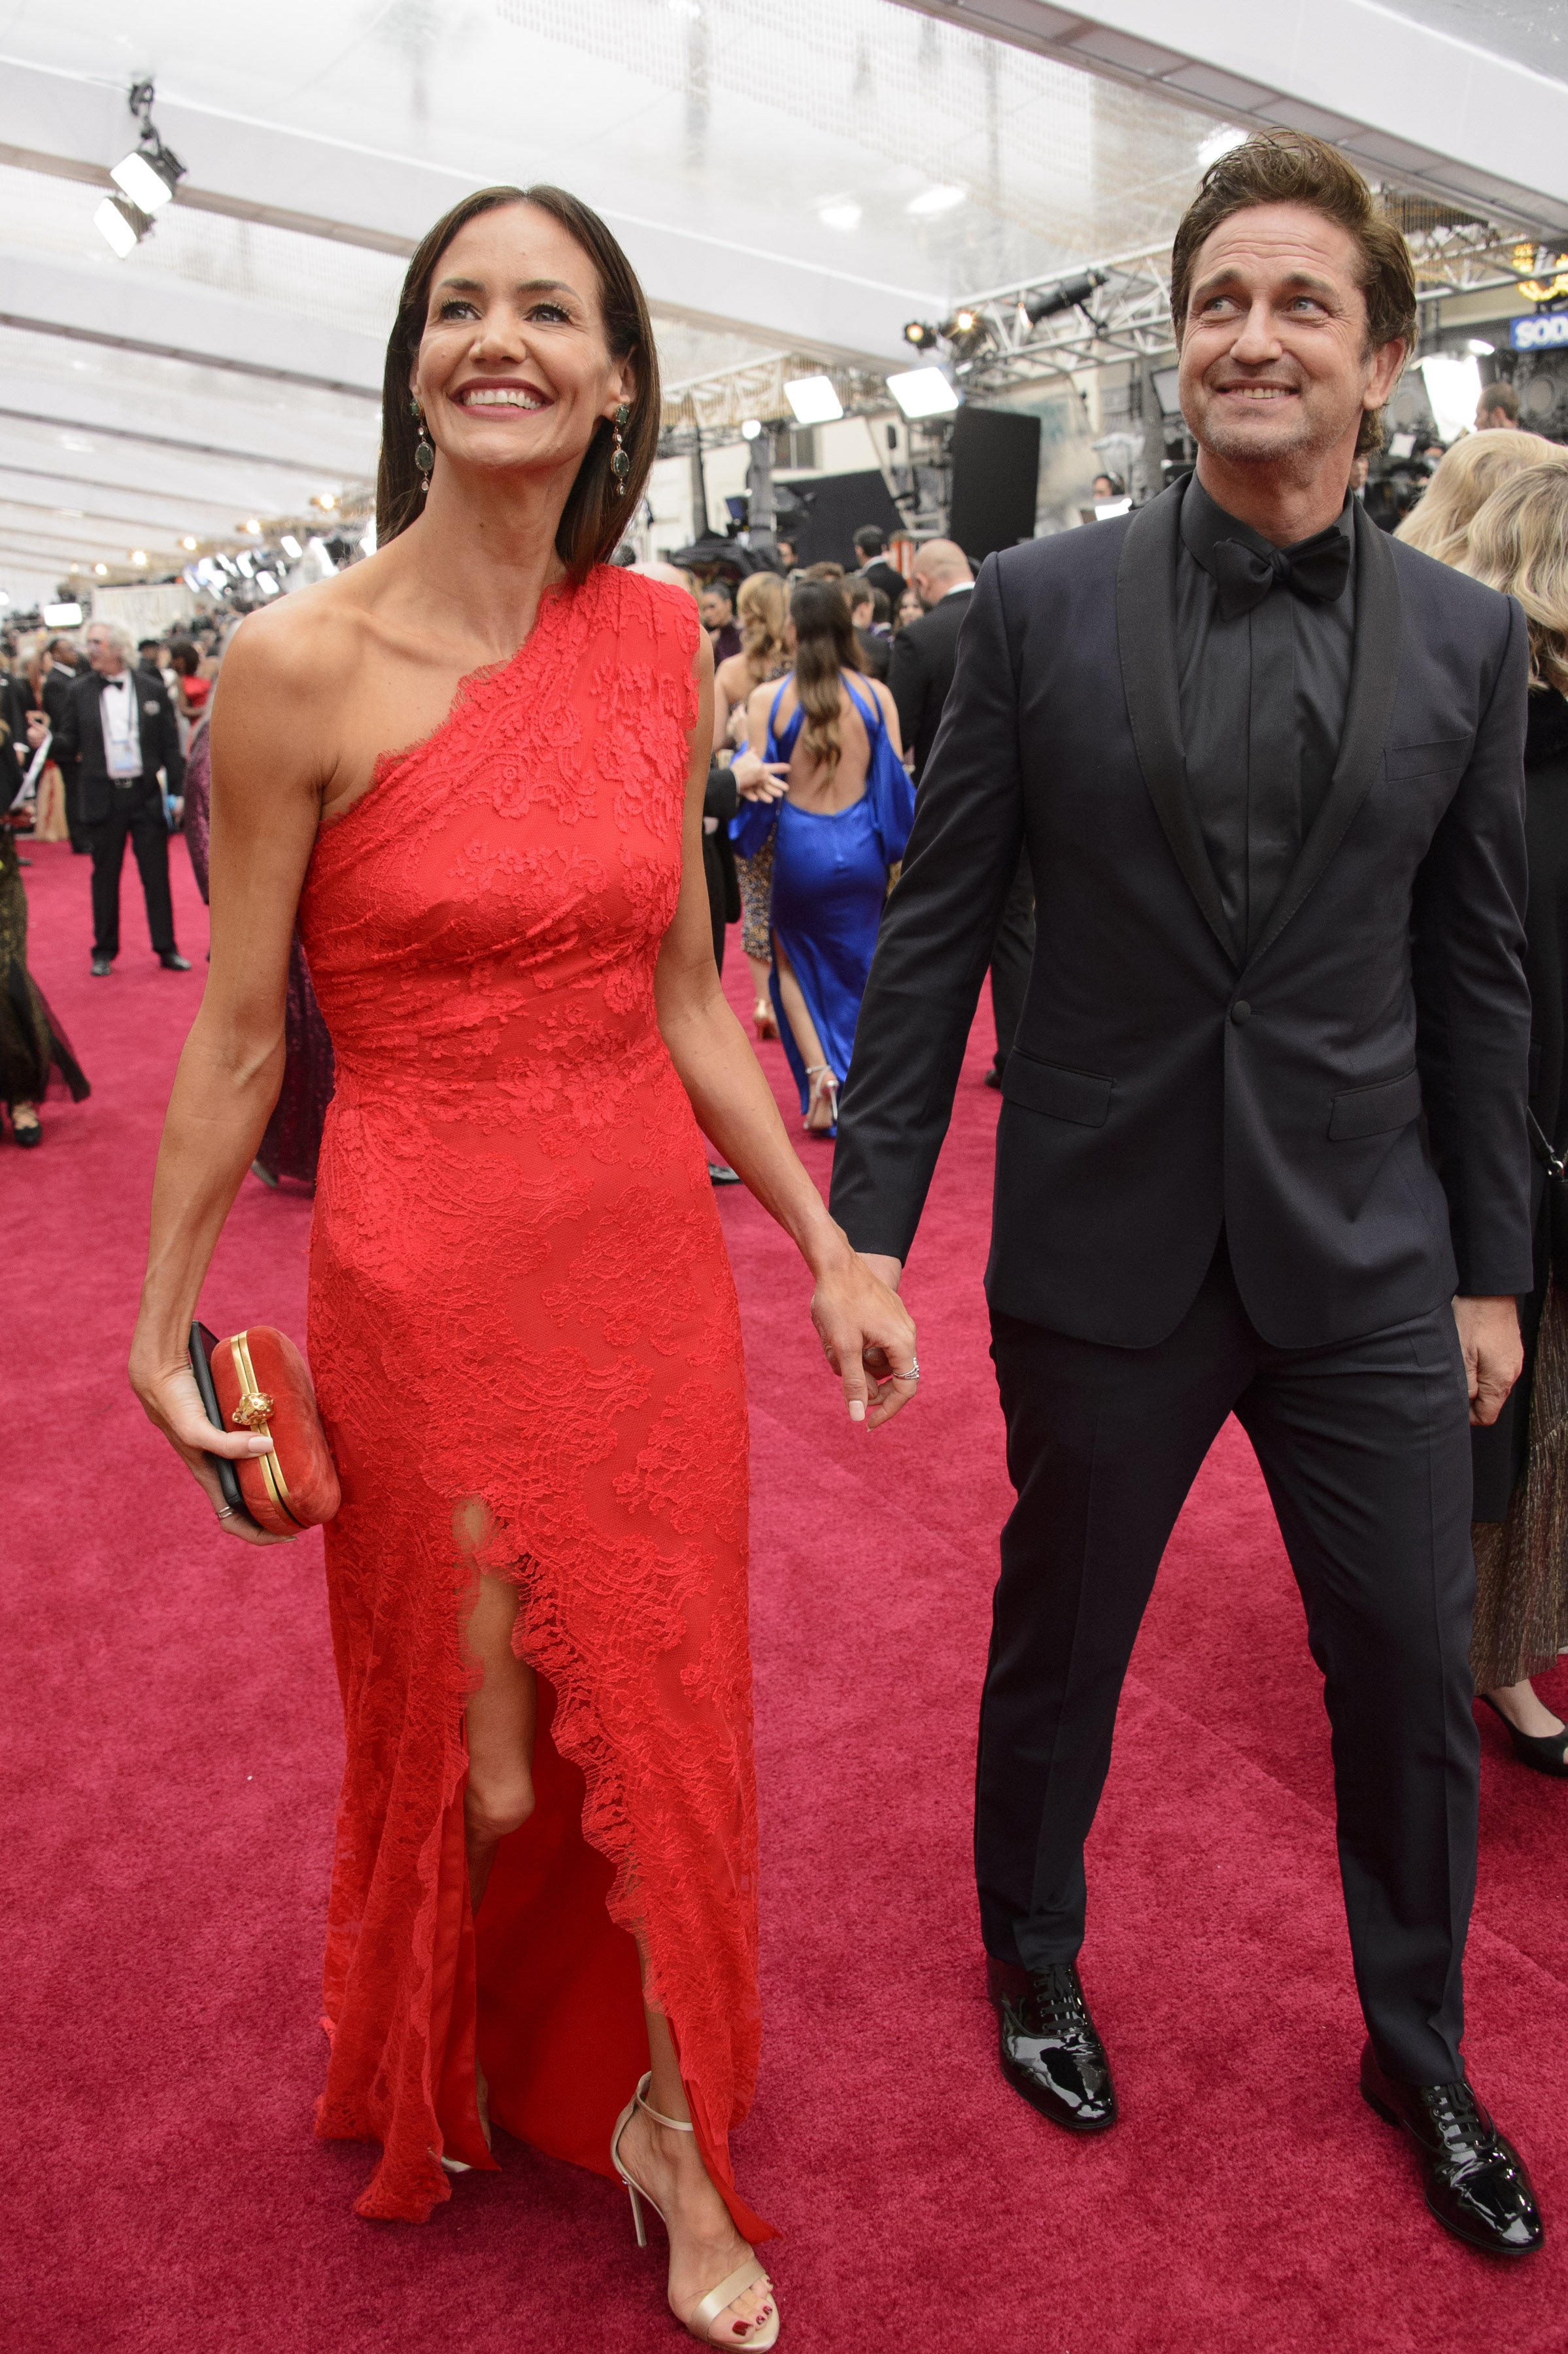 Morgan Brown and Gerard Butler at the ABC's Coverage Of The 92nd Annual Academy Awards. | Source: Getty Images